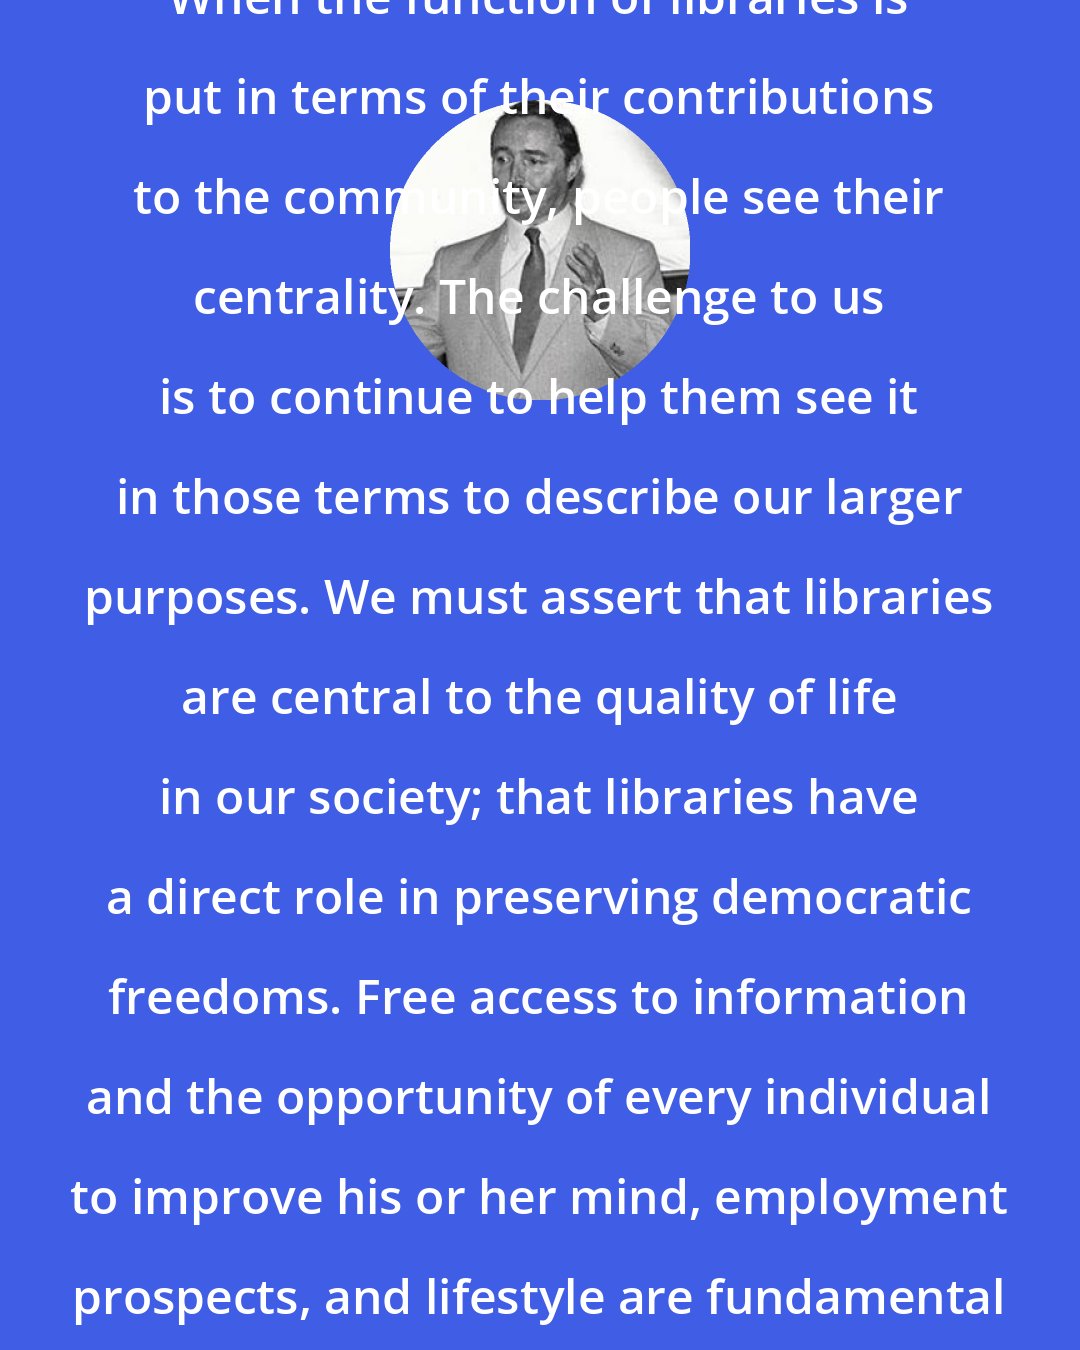 Arthur Curley: When the function of libraries is put in terms of their contributions to the community, people see their centrality. The challenge to us is to continue to help them see it in those terms to describe our larger purposes. We must assert that libraries are central to the quality of life in our society; that libraries have a direct role in preserving democratic freedoms. Free access to information and the opportunity of every individual to improve his or her mind, employment prospects, and lifestyle are fundamental rights in our society.